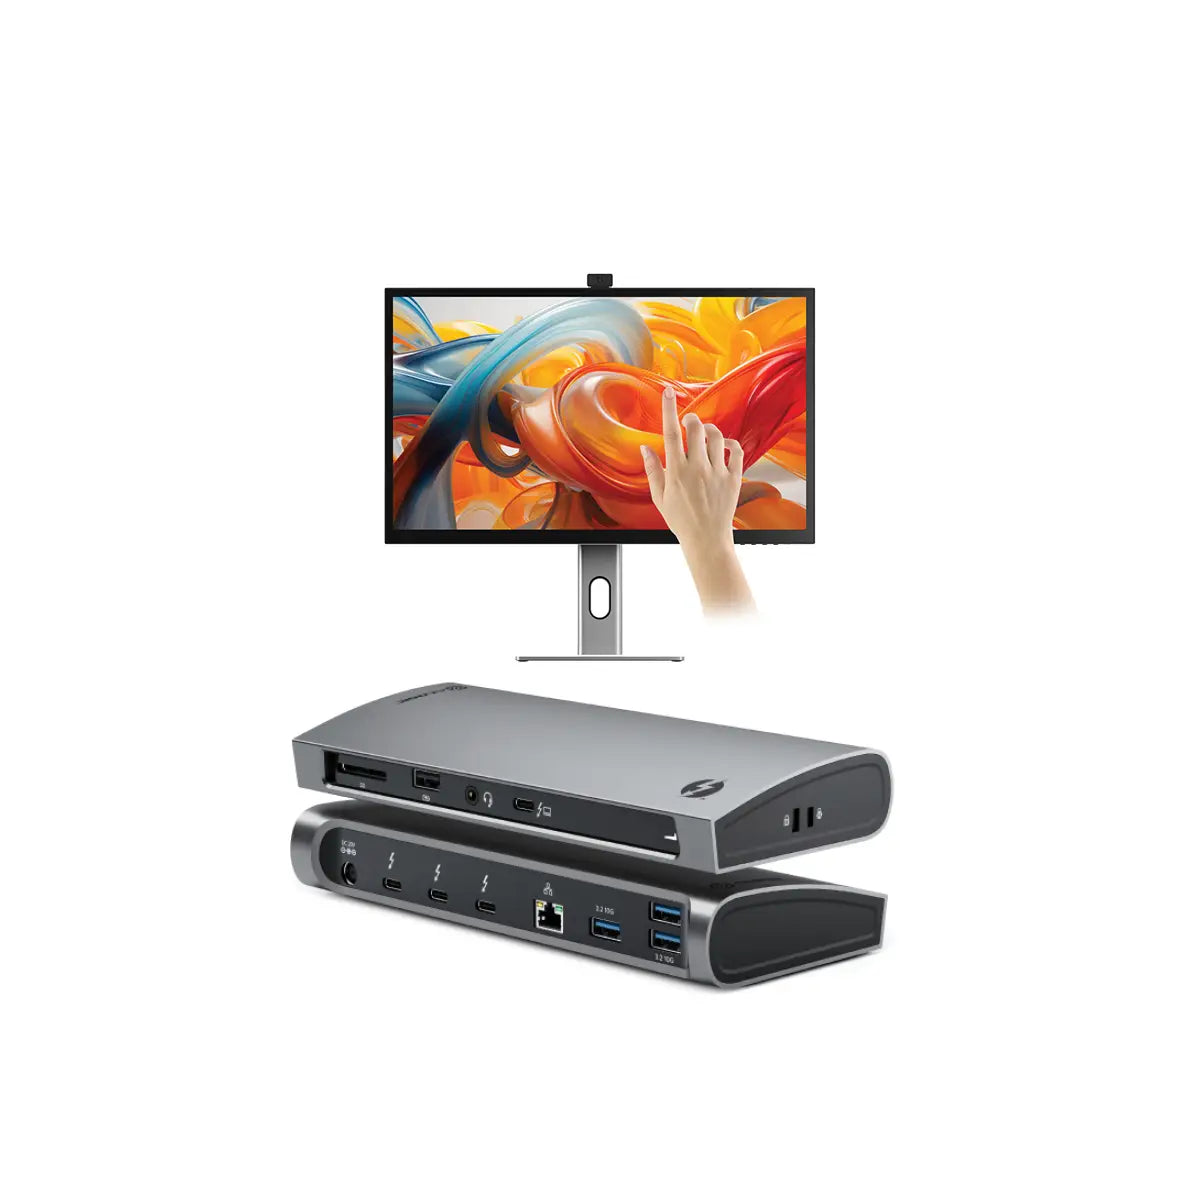 clarity-pro-touch-27-uhd-4k-monitor-with-65w-pd-webcam-and-touchscreen-thunderbolt-4-blaze-docking-station1